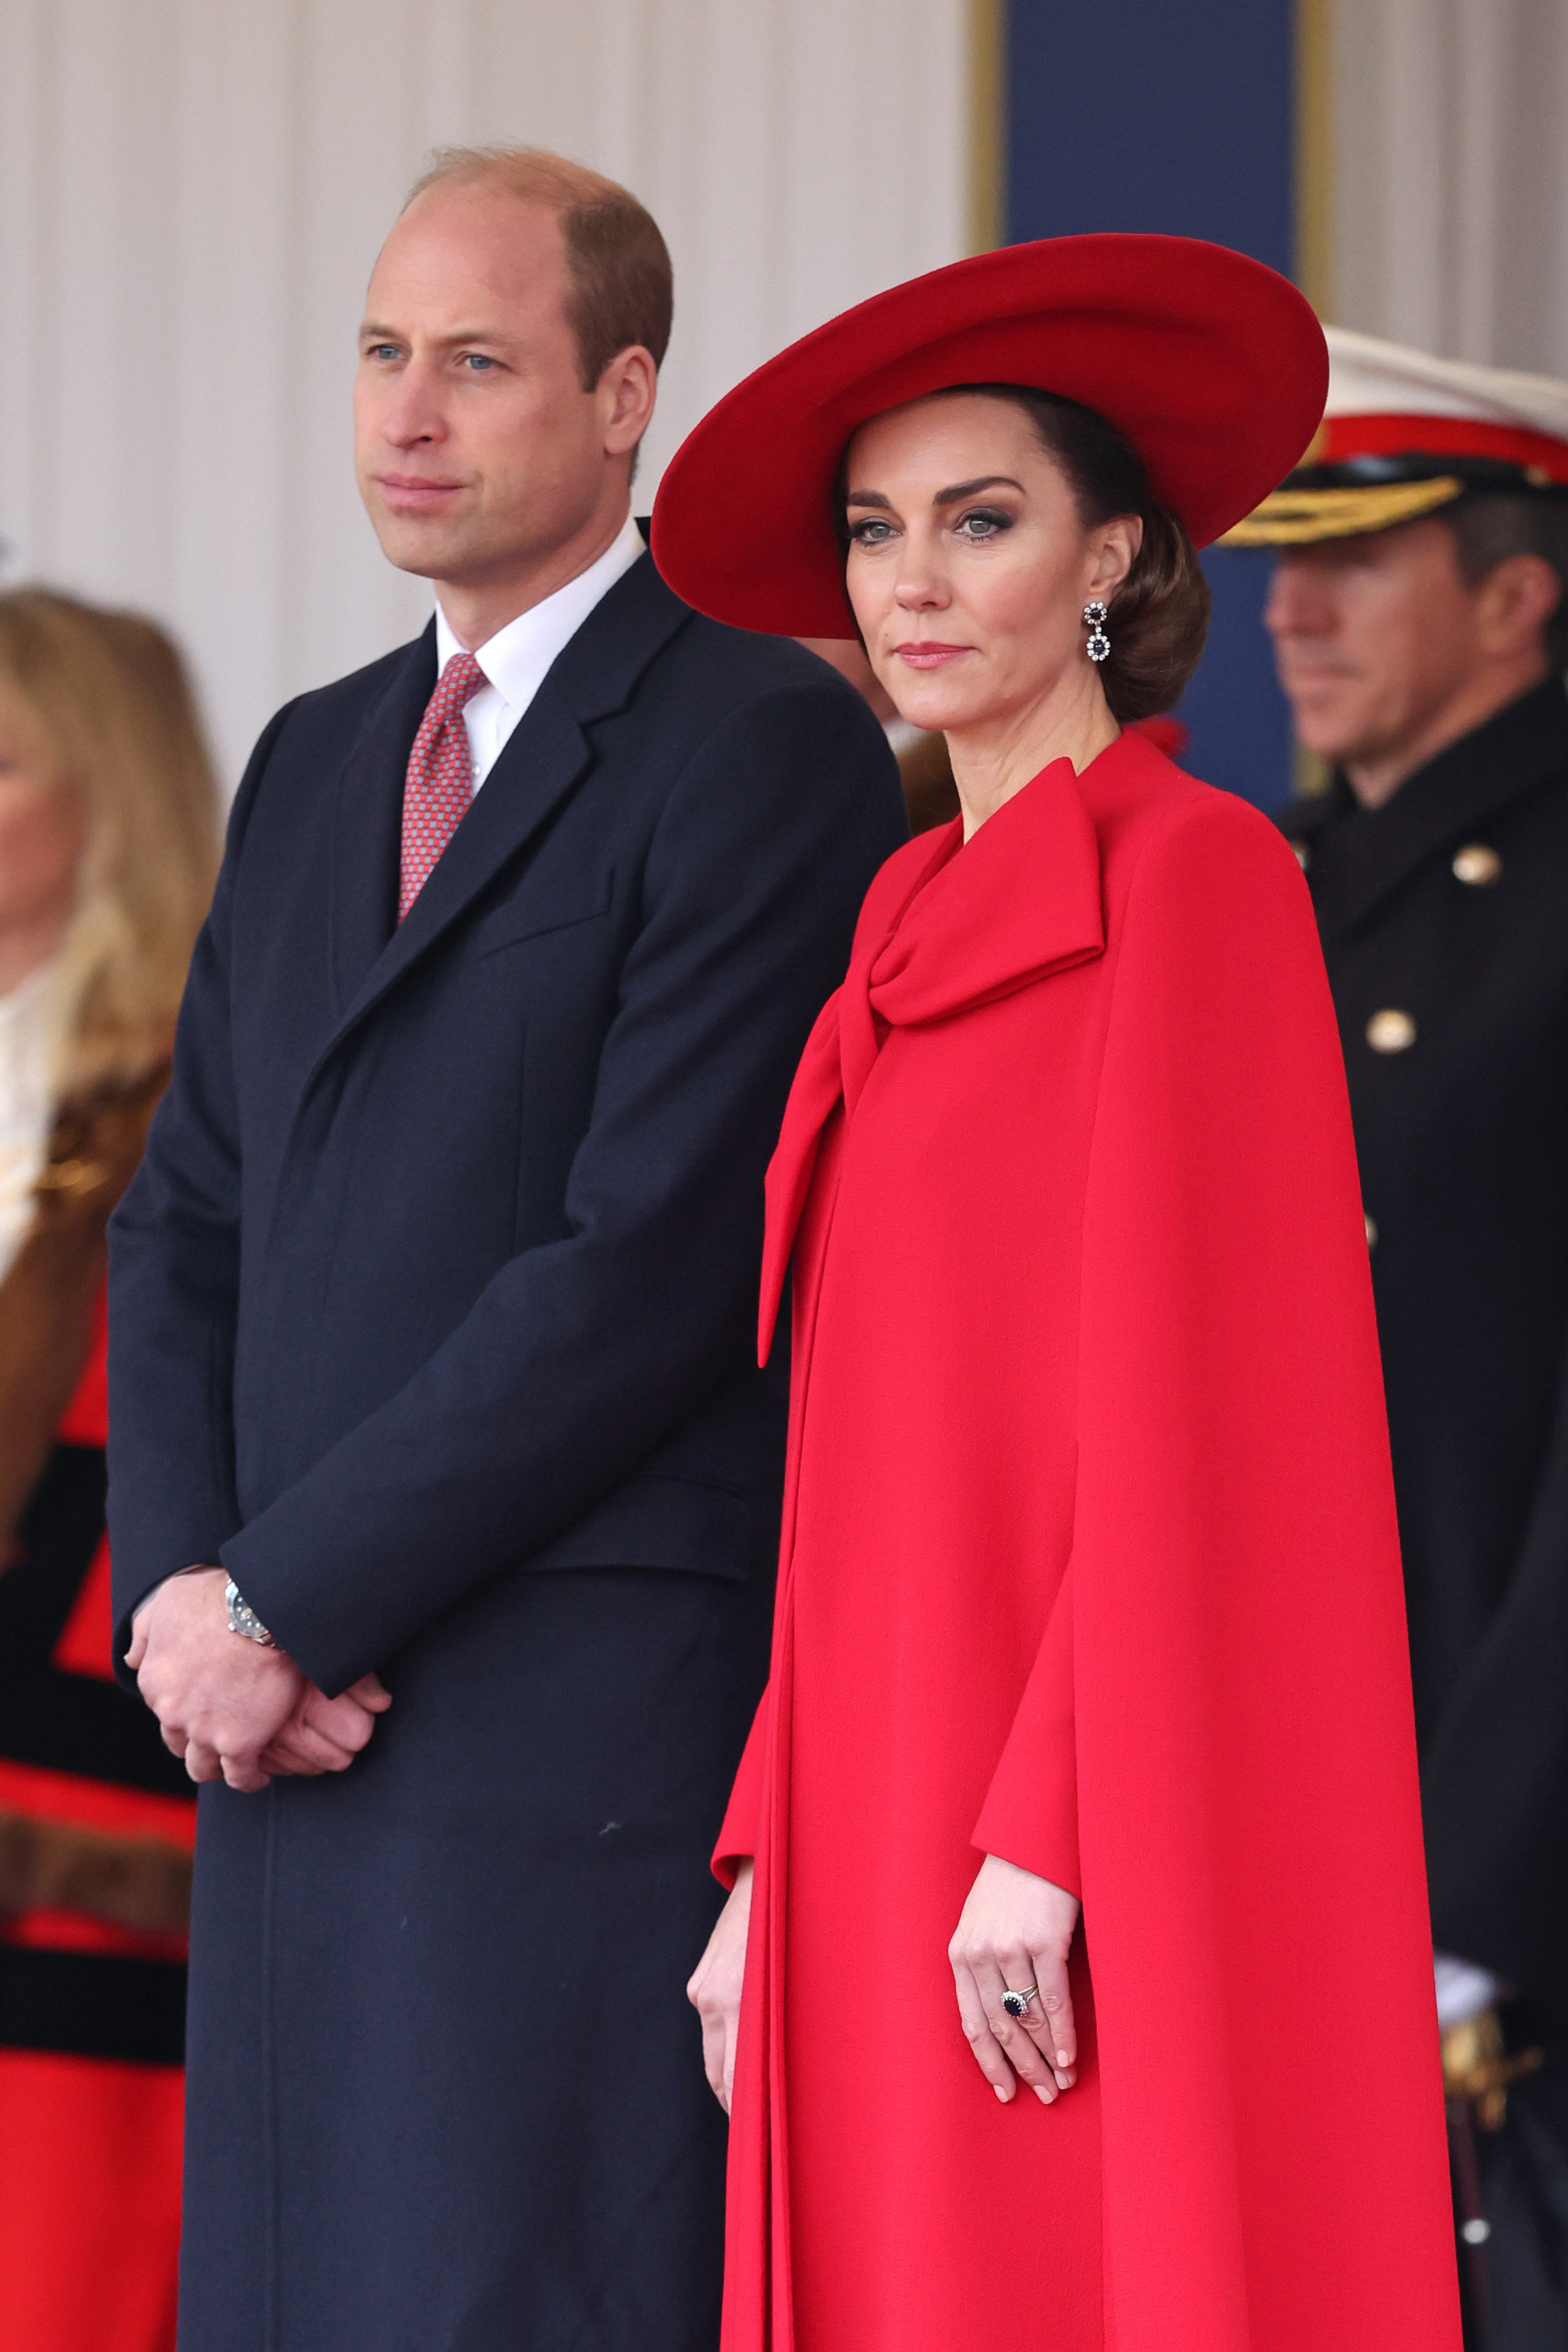 Prince William, Prince of Wales and Catherine, Princess of Wales attend a ceremonial welcome for The President and the First Lady of the Republic of Korea at Horse Guards Parade on November 21, 2023, in London, England | Source: Getty Images